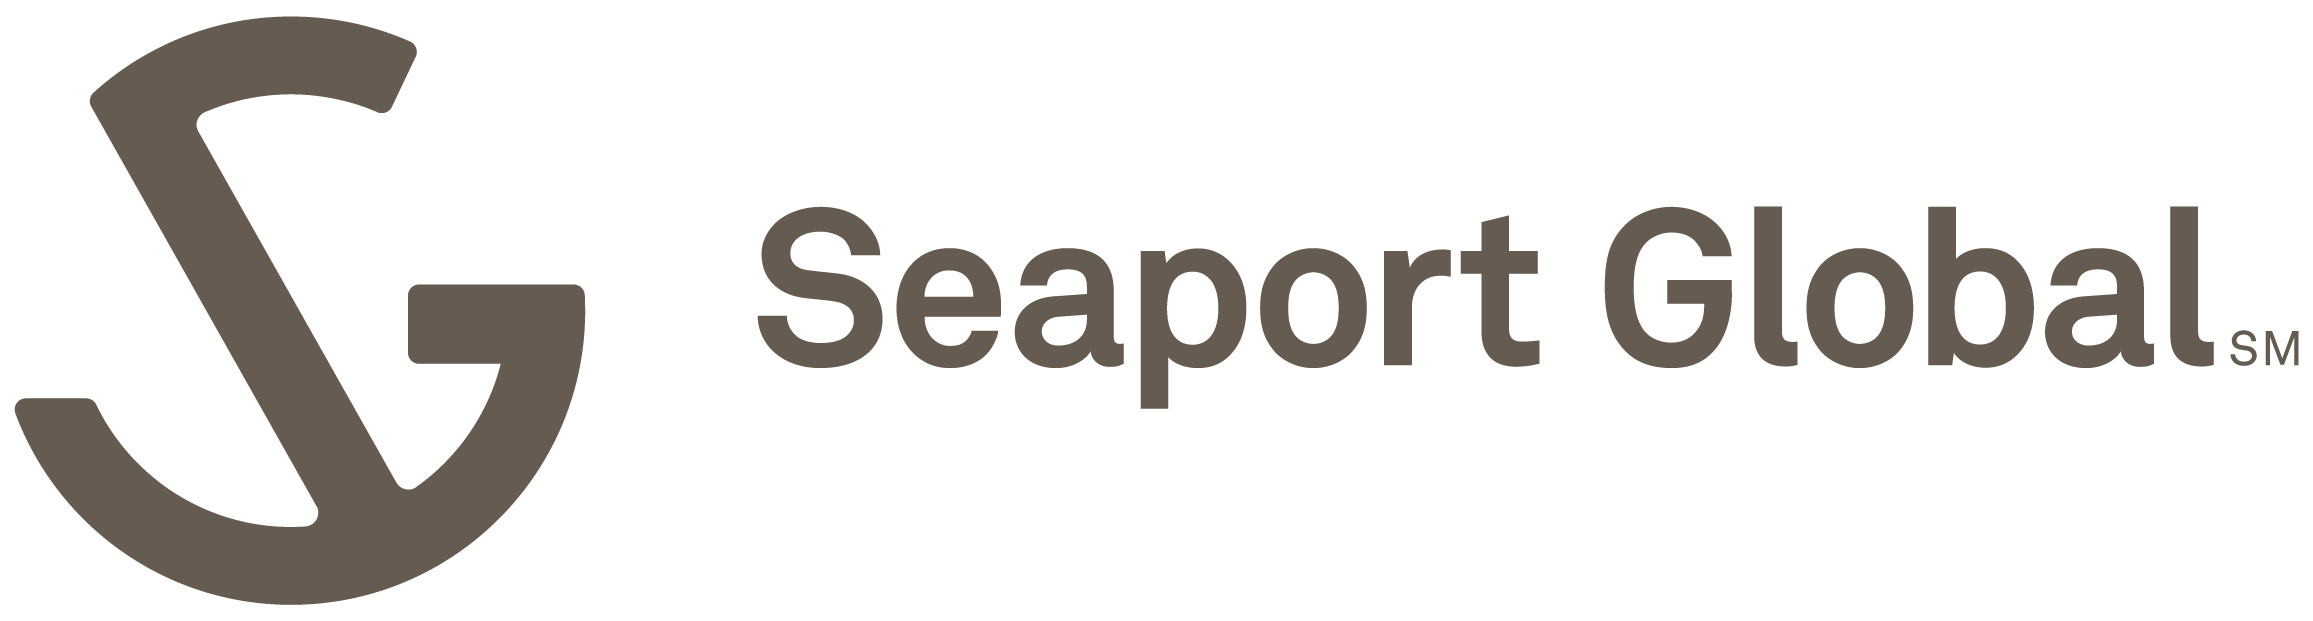 Seaport Global Securities Expands its Equity Research Team with New Hires